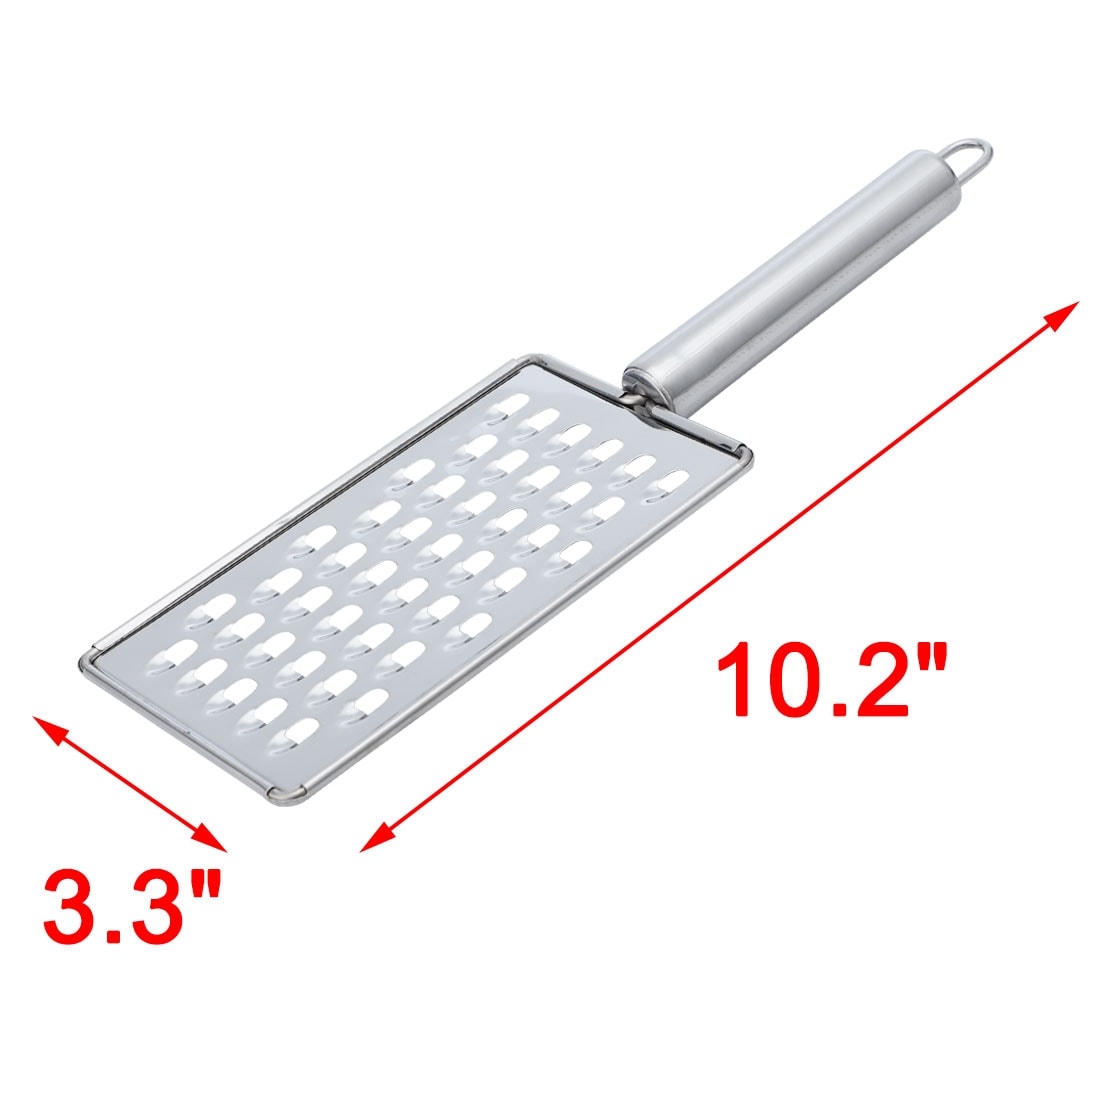 https://ak1.ostkcdn.com/images/products/is/images/direct/9cdcb0b5b4d15208cb843f79520e692307ef02da/Stainless-Steel-Cheese-Grater-Fruit-Vegetable-Grater-for-Kitchen-Restaurant.jpg